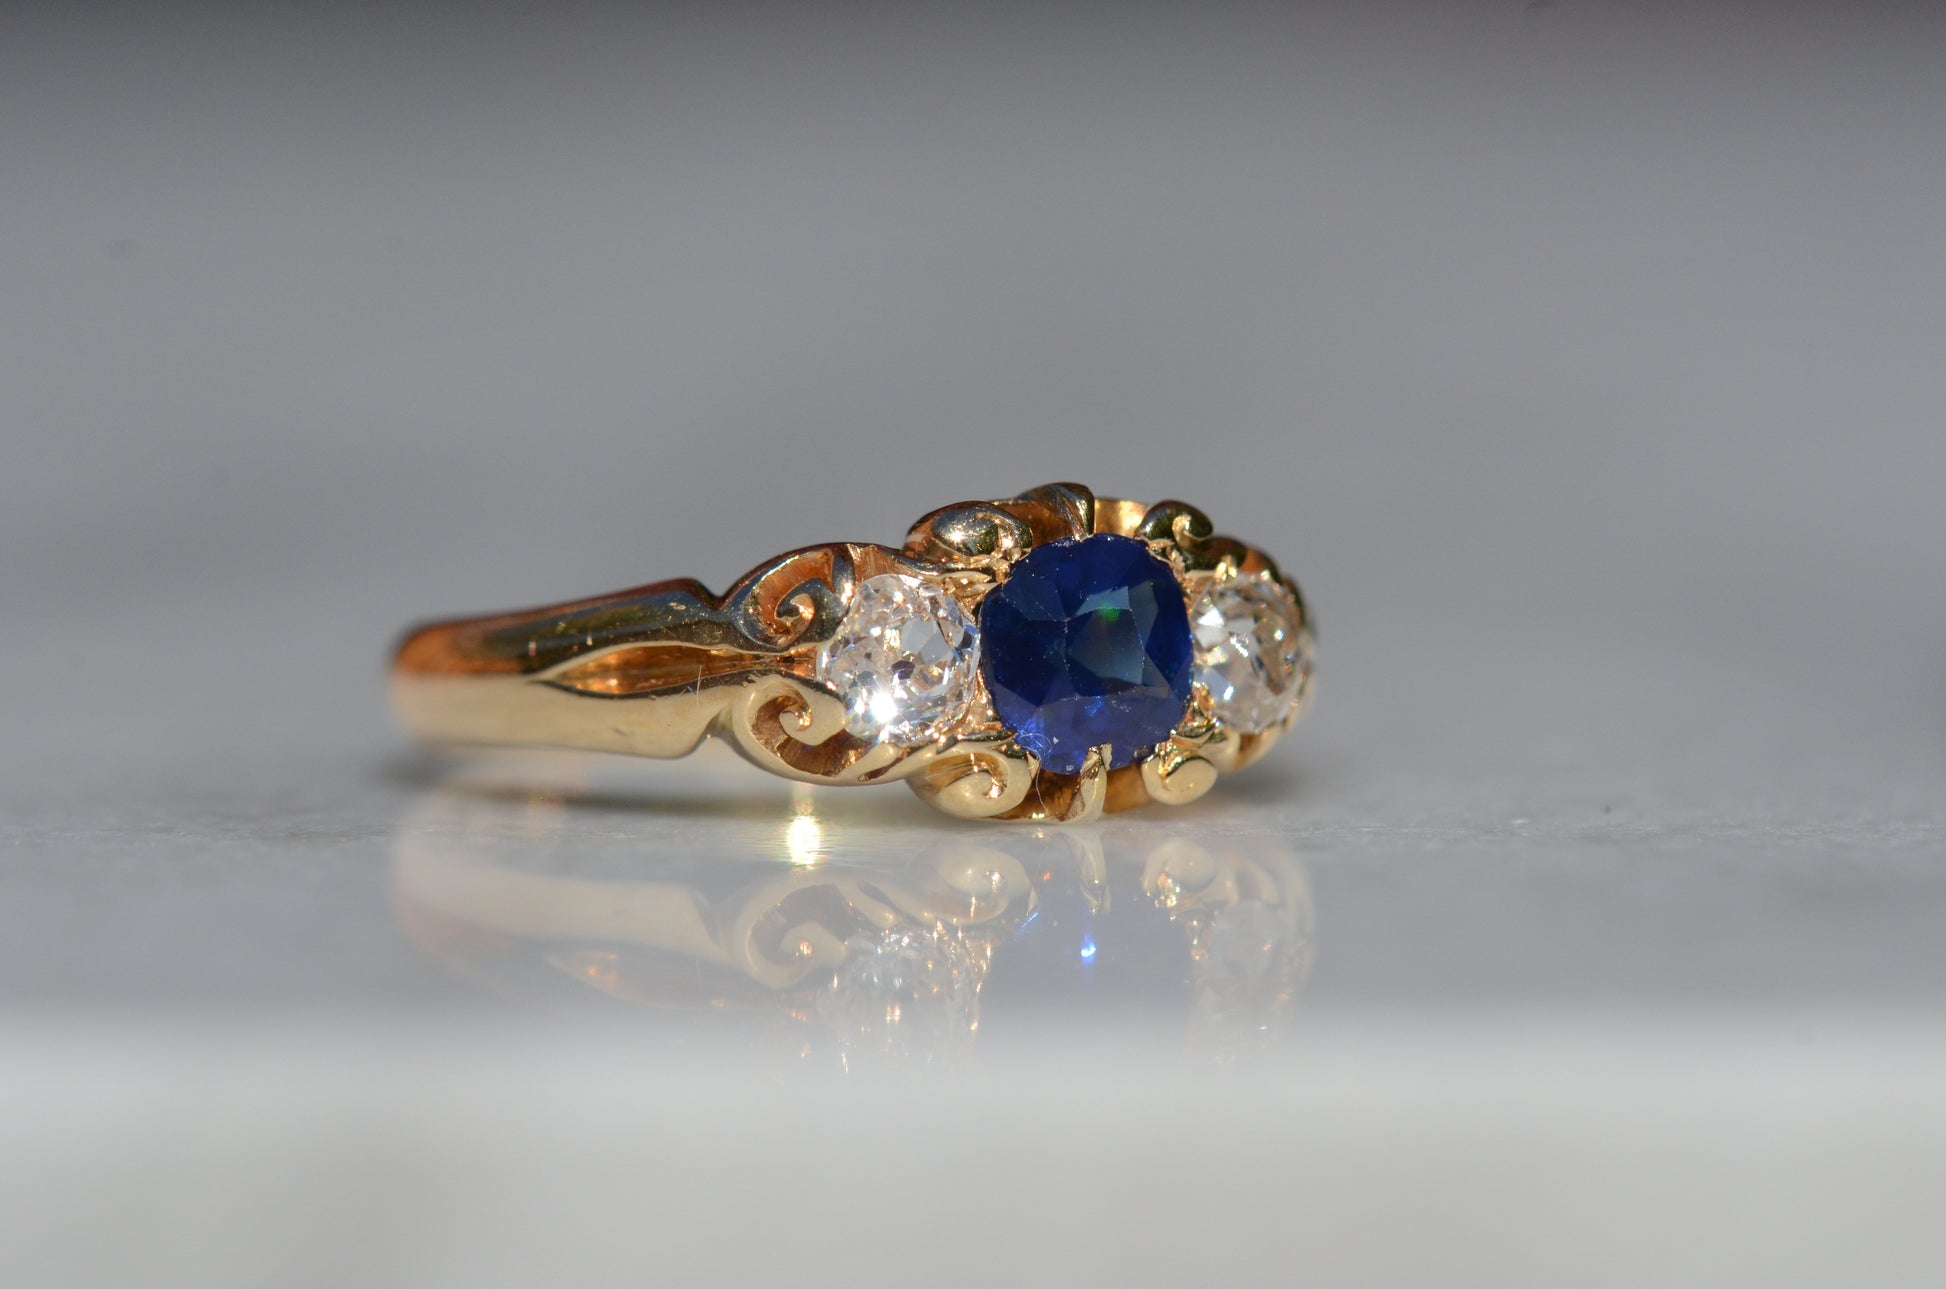 A Victorian ring in yellow gold with swirling shoulders and a central vivid blue sapphire flanked by a pair of old mine cut diamonds, photographed moderately to the right to highlight to shoulder of the ring.